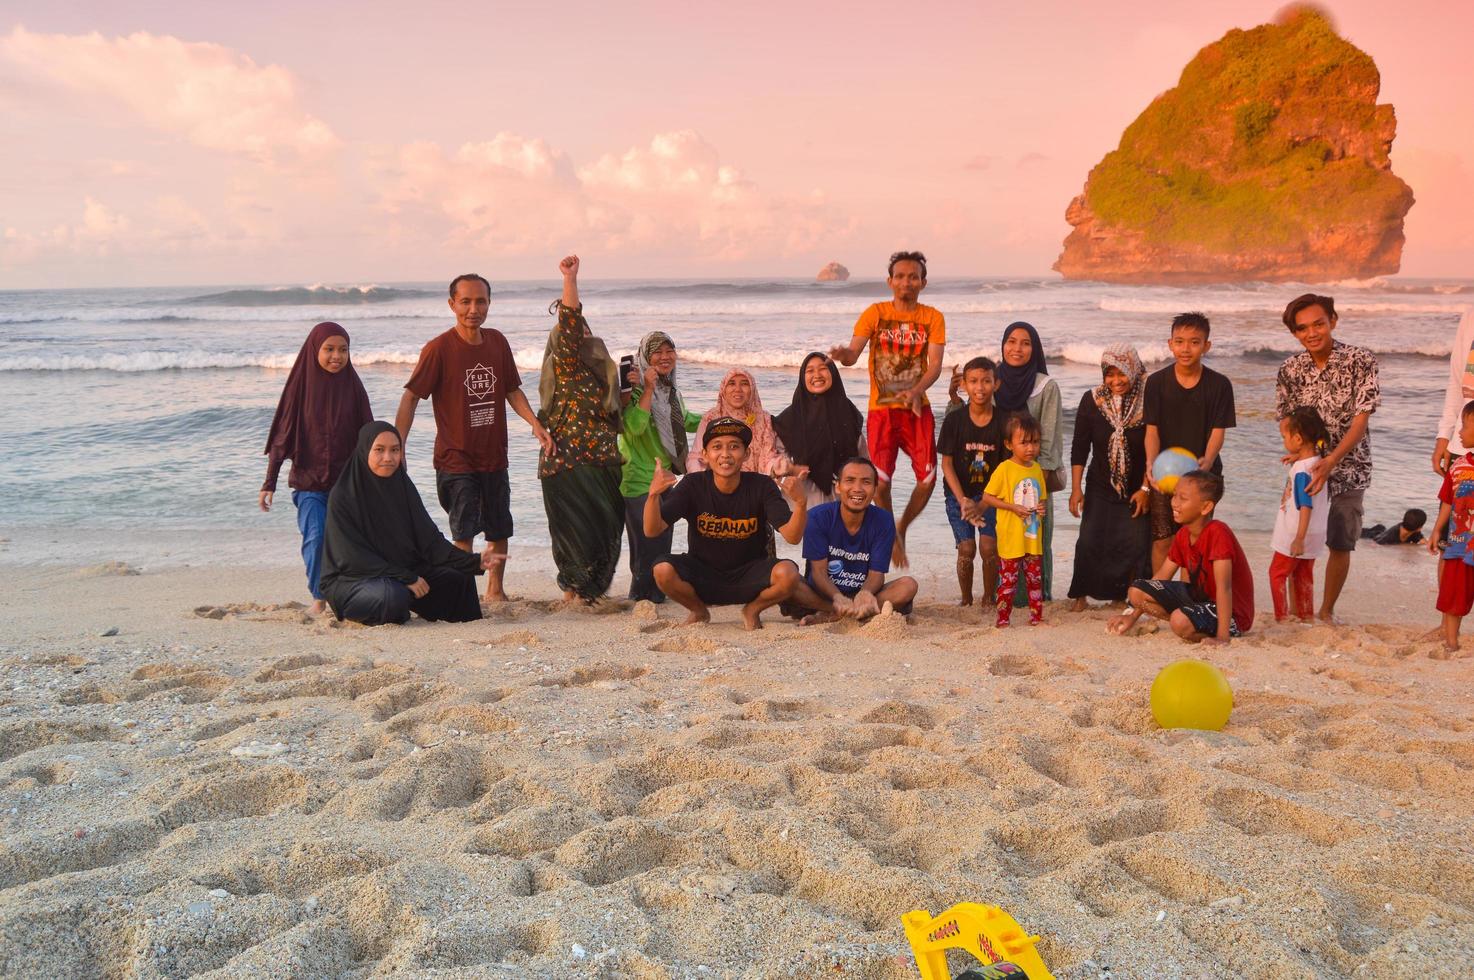 malang, indonesia, 2022 - beach atmosphere with people meeting photos during the Eid al-Fitr holiday after the 2022 pandemic on the coast of Goa China, Malang